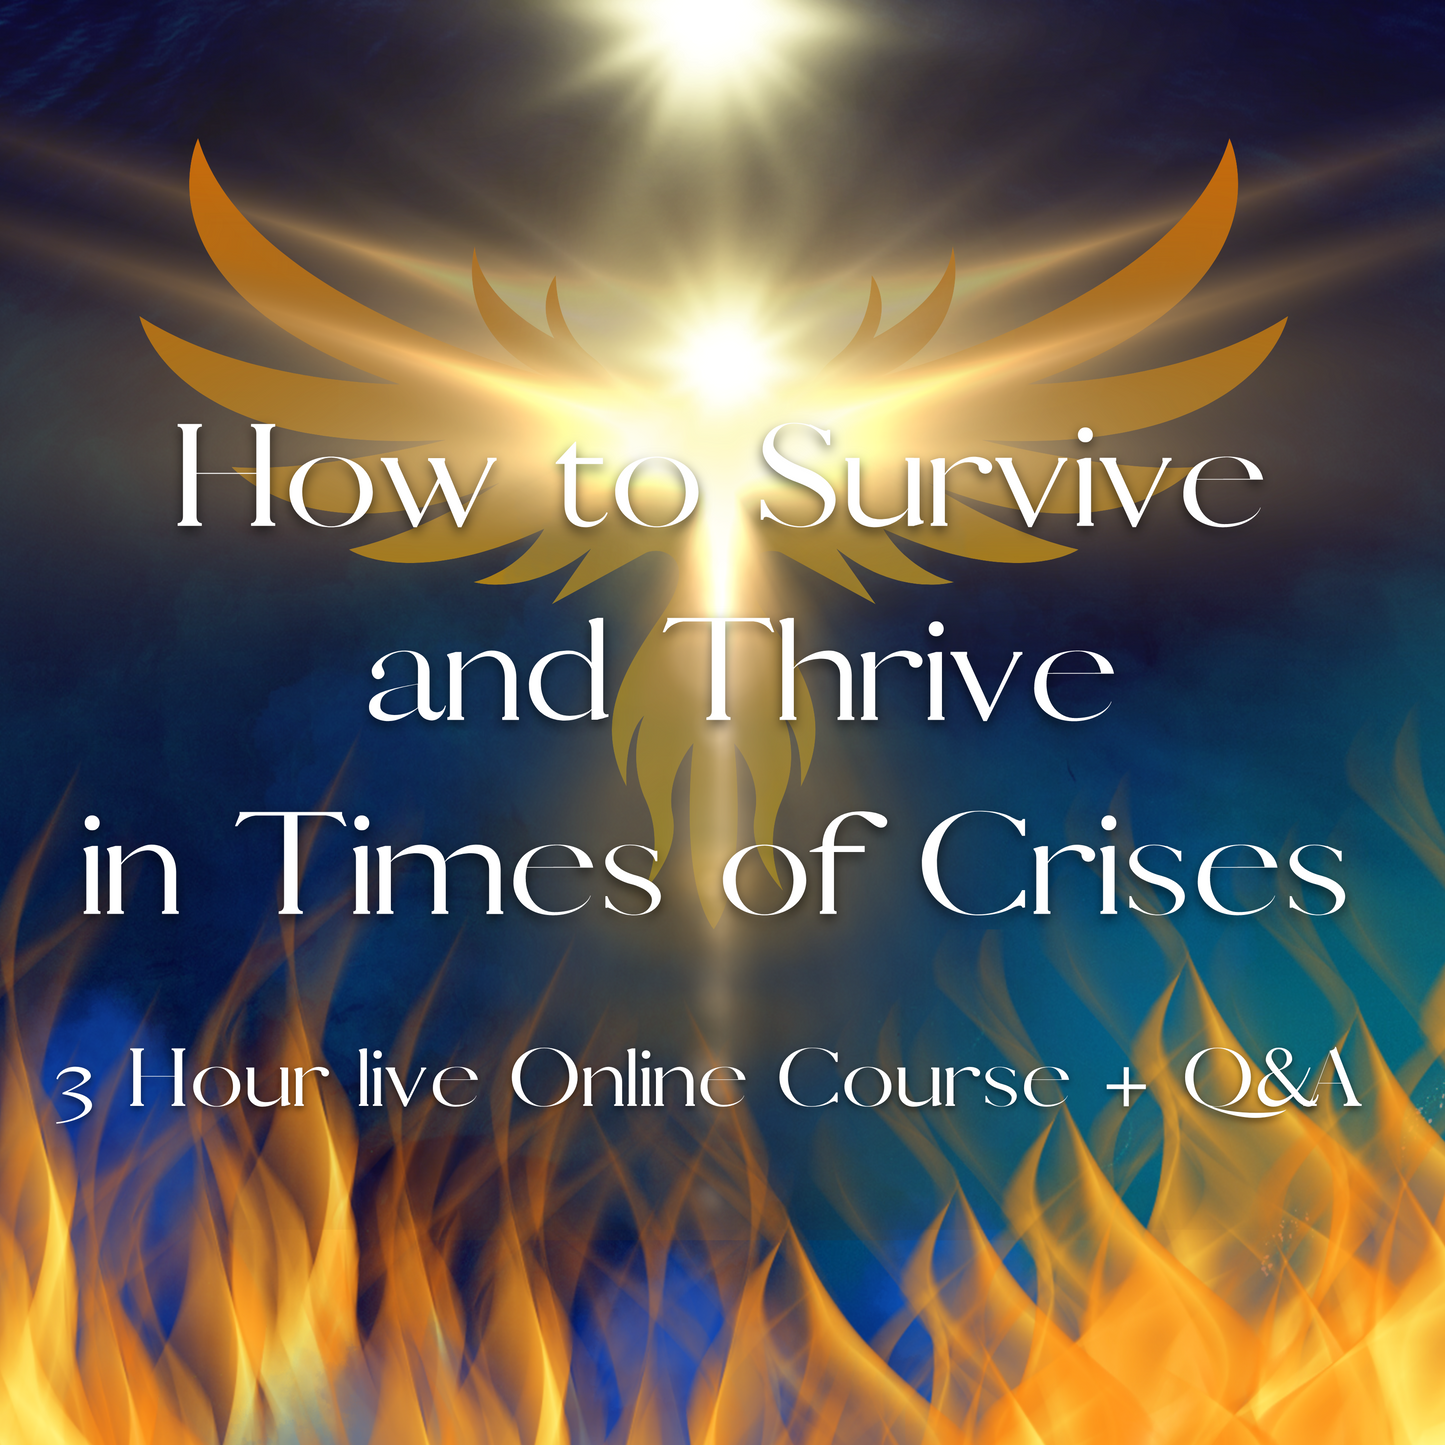 Spiritual Laws for Surviving and Thriving in Times of Crisis